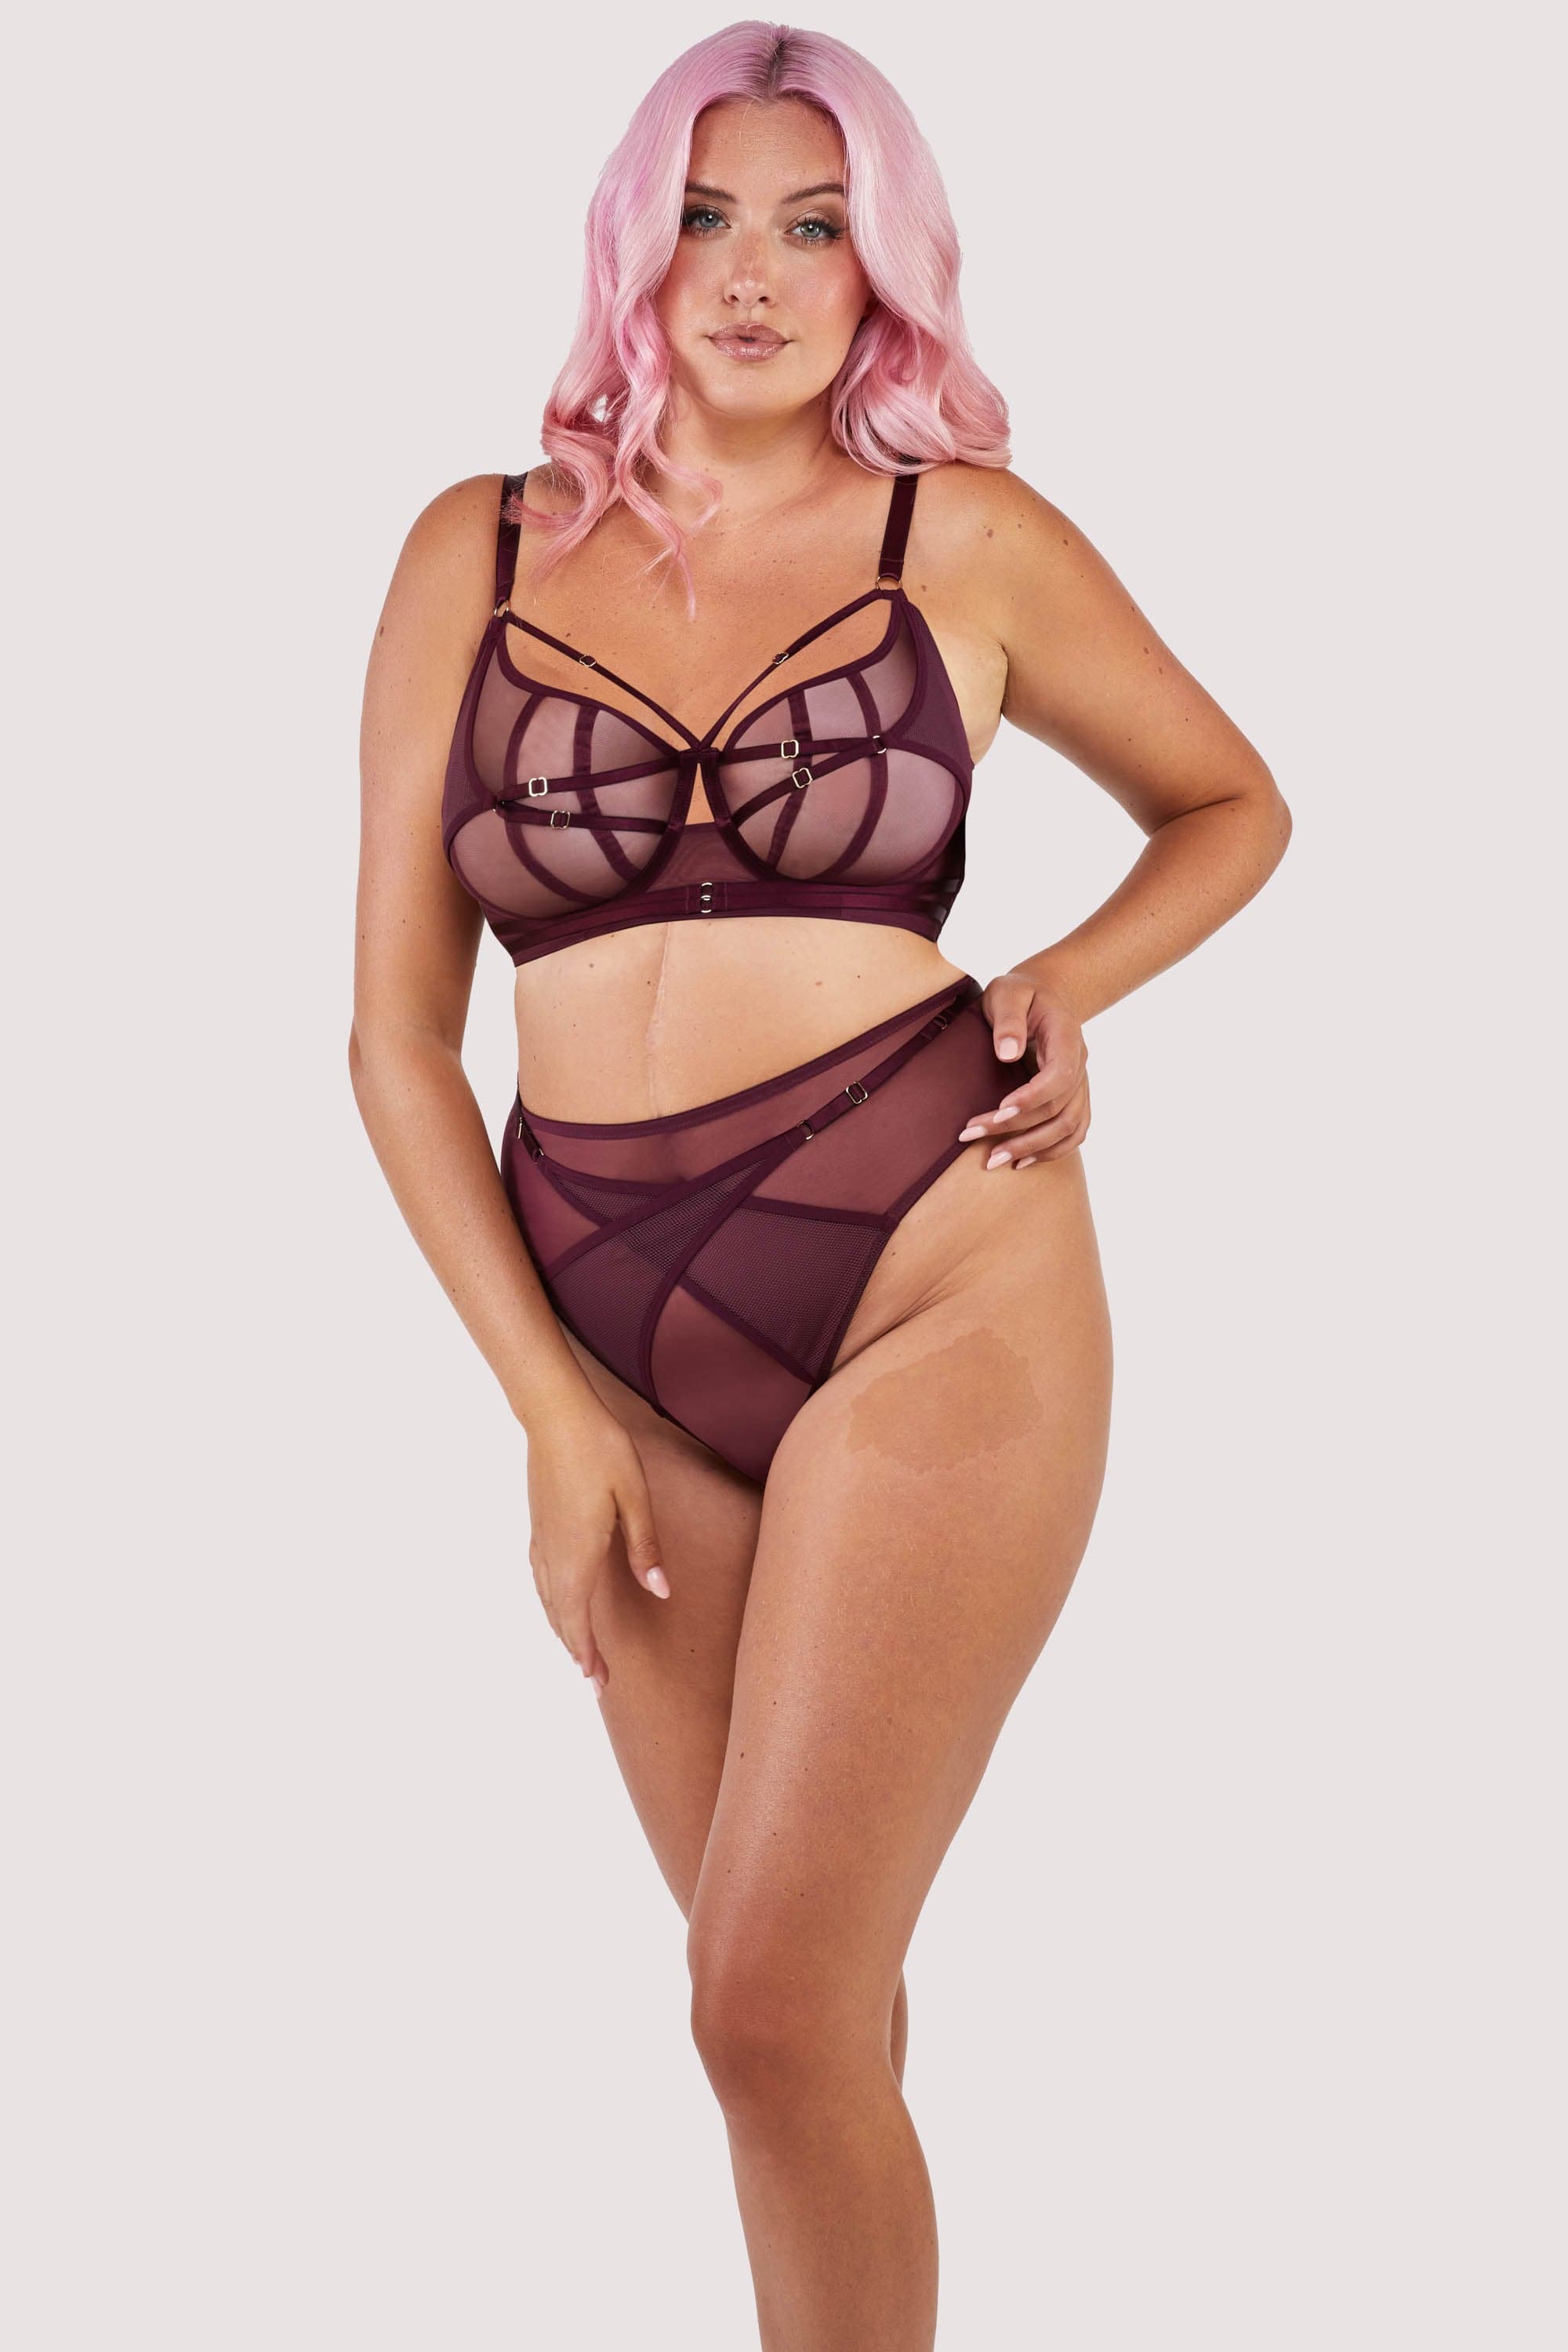 Harness style bra with mesh overlay and visible gold hardware in a deep wine red/purple, worn with a matching brief.